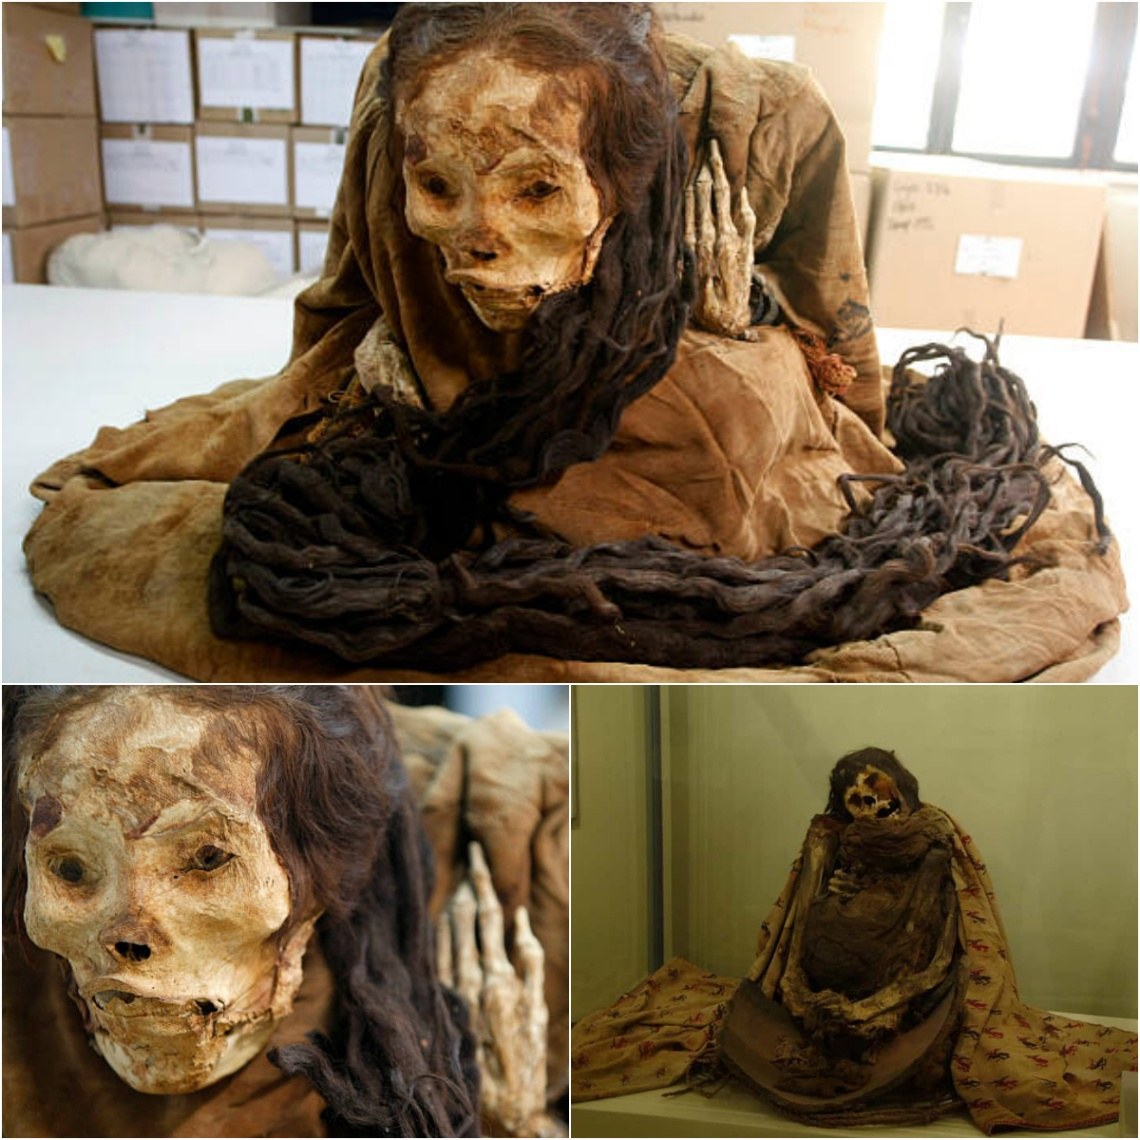 Deciphering the Enigmatic Secrets of Huaca: The Long-Haired Princess from 200 BC